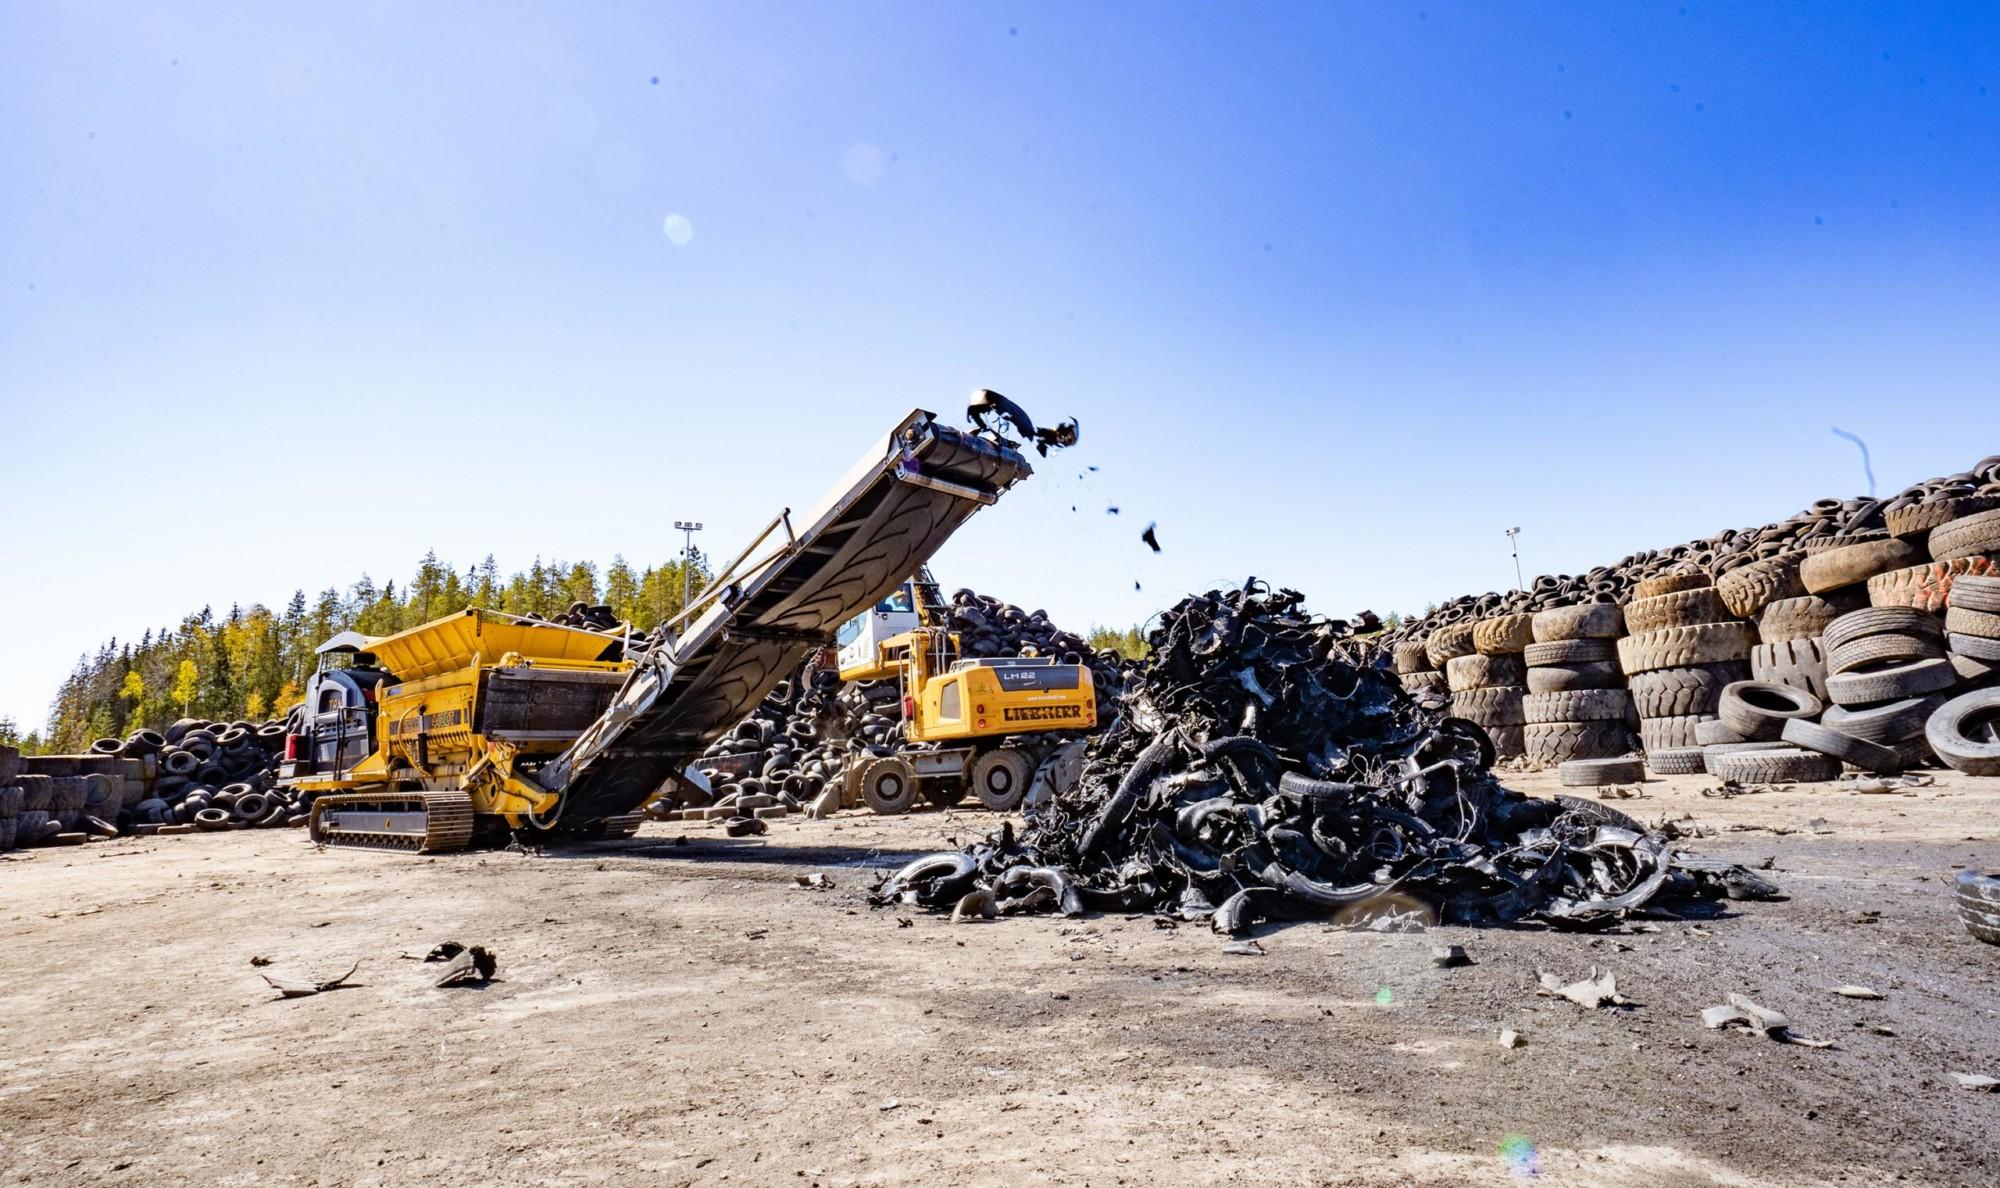 TANA industrial waste shredder Shredding and recycling rubber waste for energy